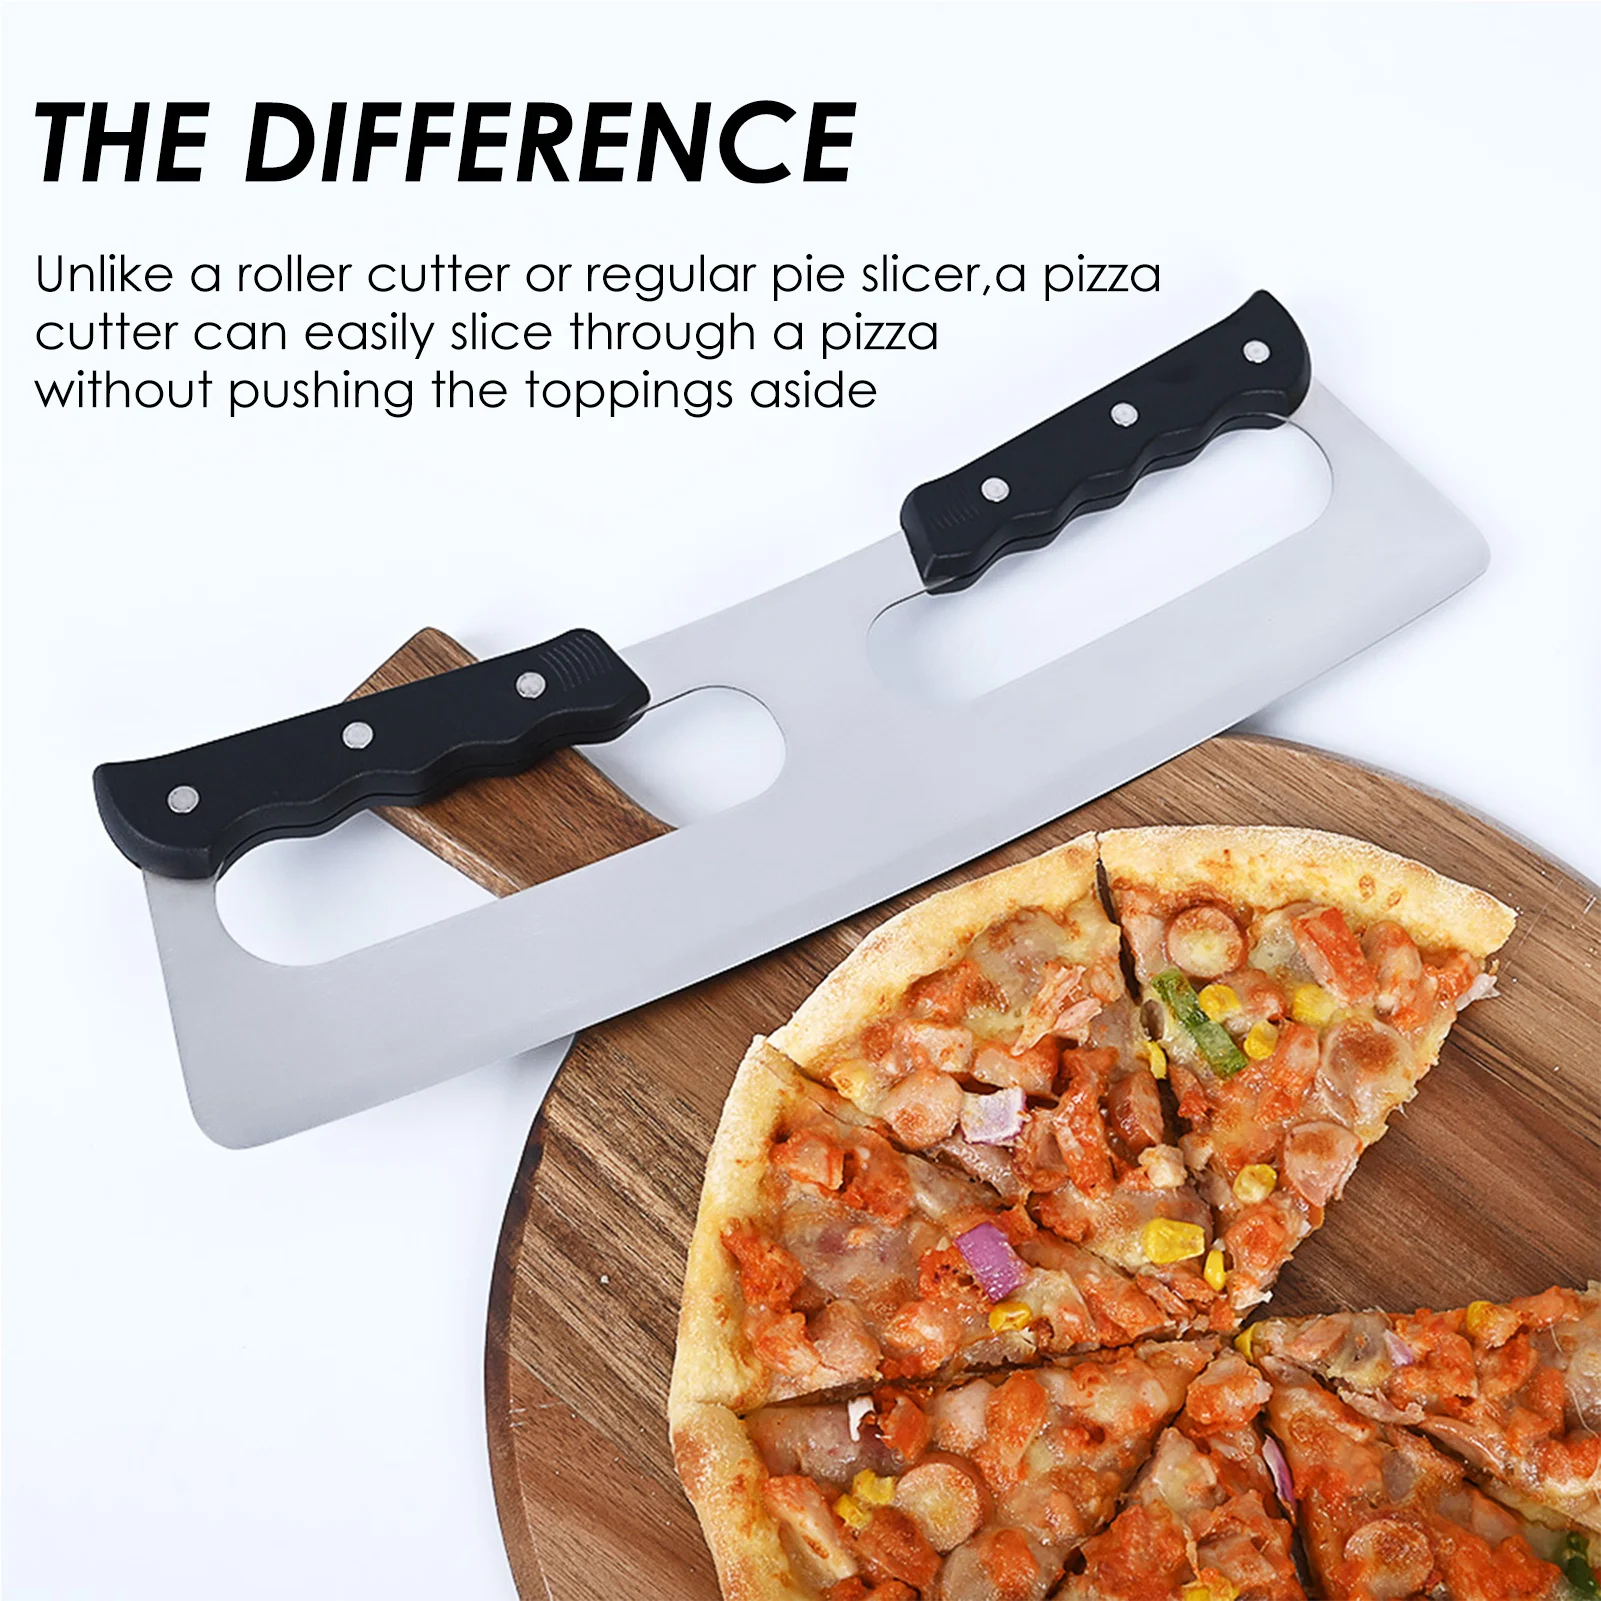 Kitchen Pizza Cutter Stainless Steel Slicer Chopper With Double Handle And Protective Cover Baking Tool For Pastry Pasta Cakes